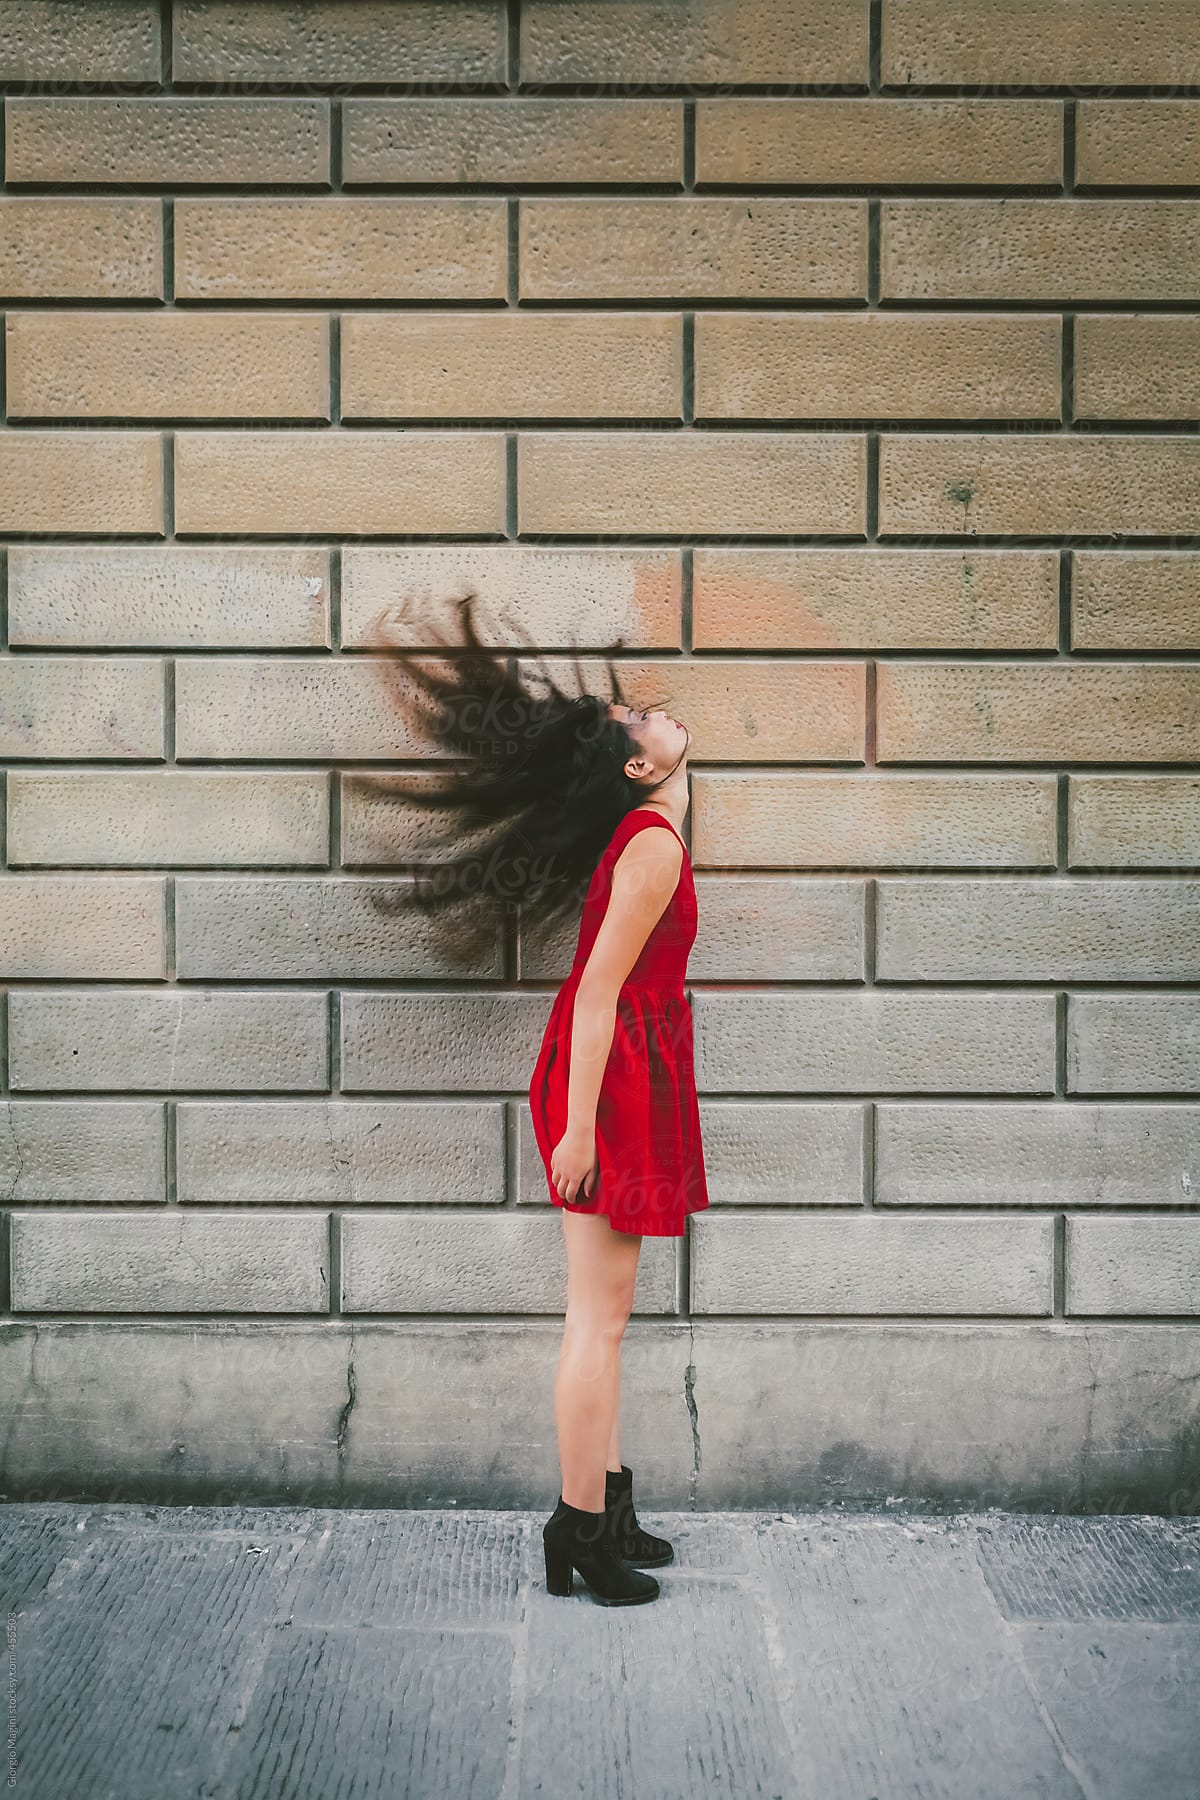 Asian Woman In Red Dress Flipping Her Hair By Giorgio Magini